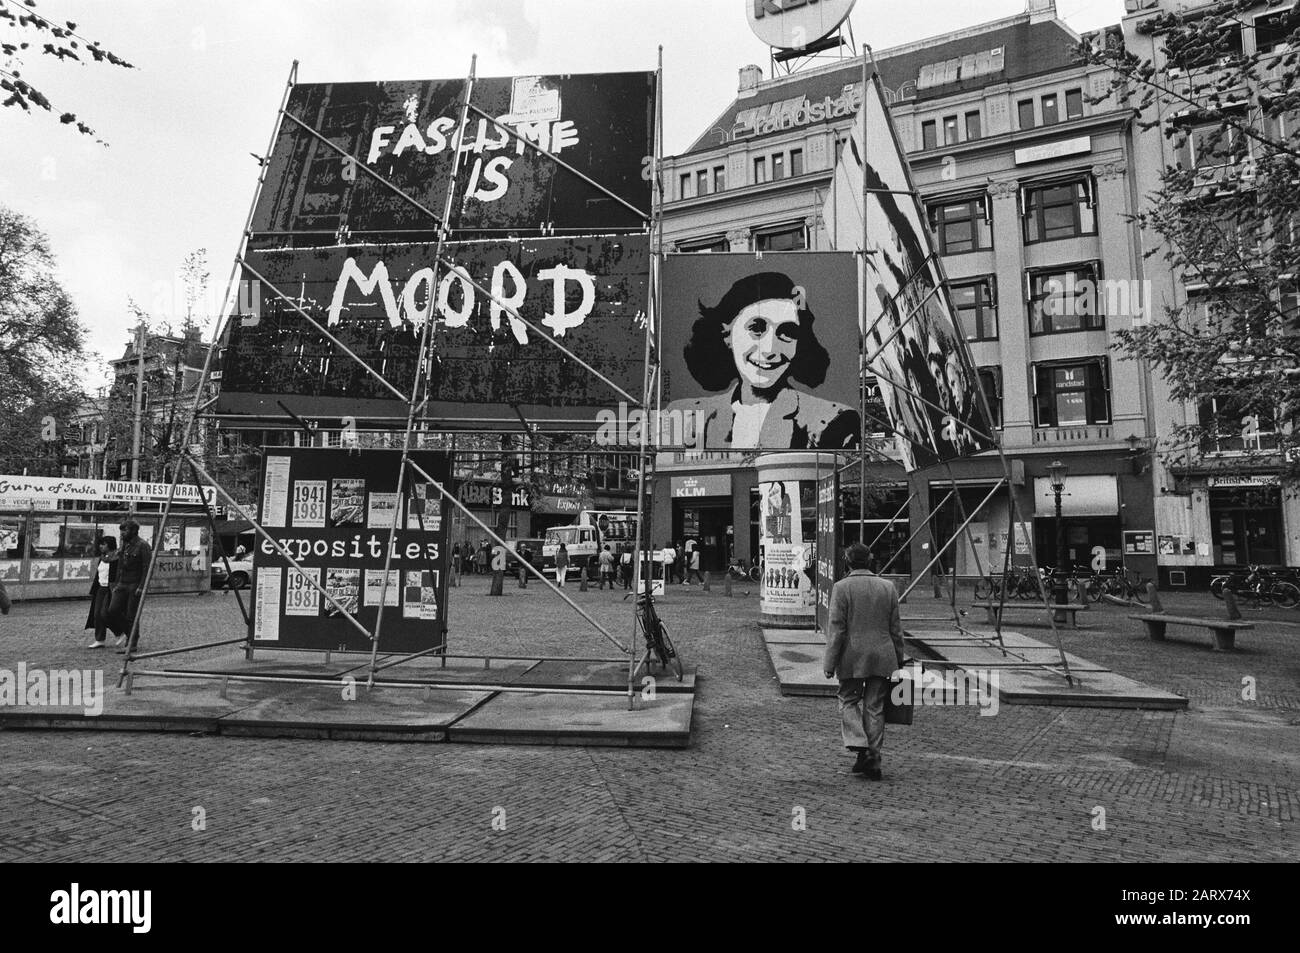 Temporary commemoration sign for the commemoration of 4 and 5 May on the Leidseplein with texts and a portrait of Anne Frank Datate: 1 May 1981 Location: Amsterdam, Noord-Holland Keywords: commemorations, portraits, texts Stock Photo